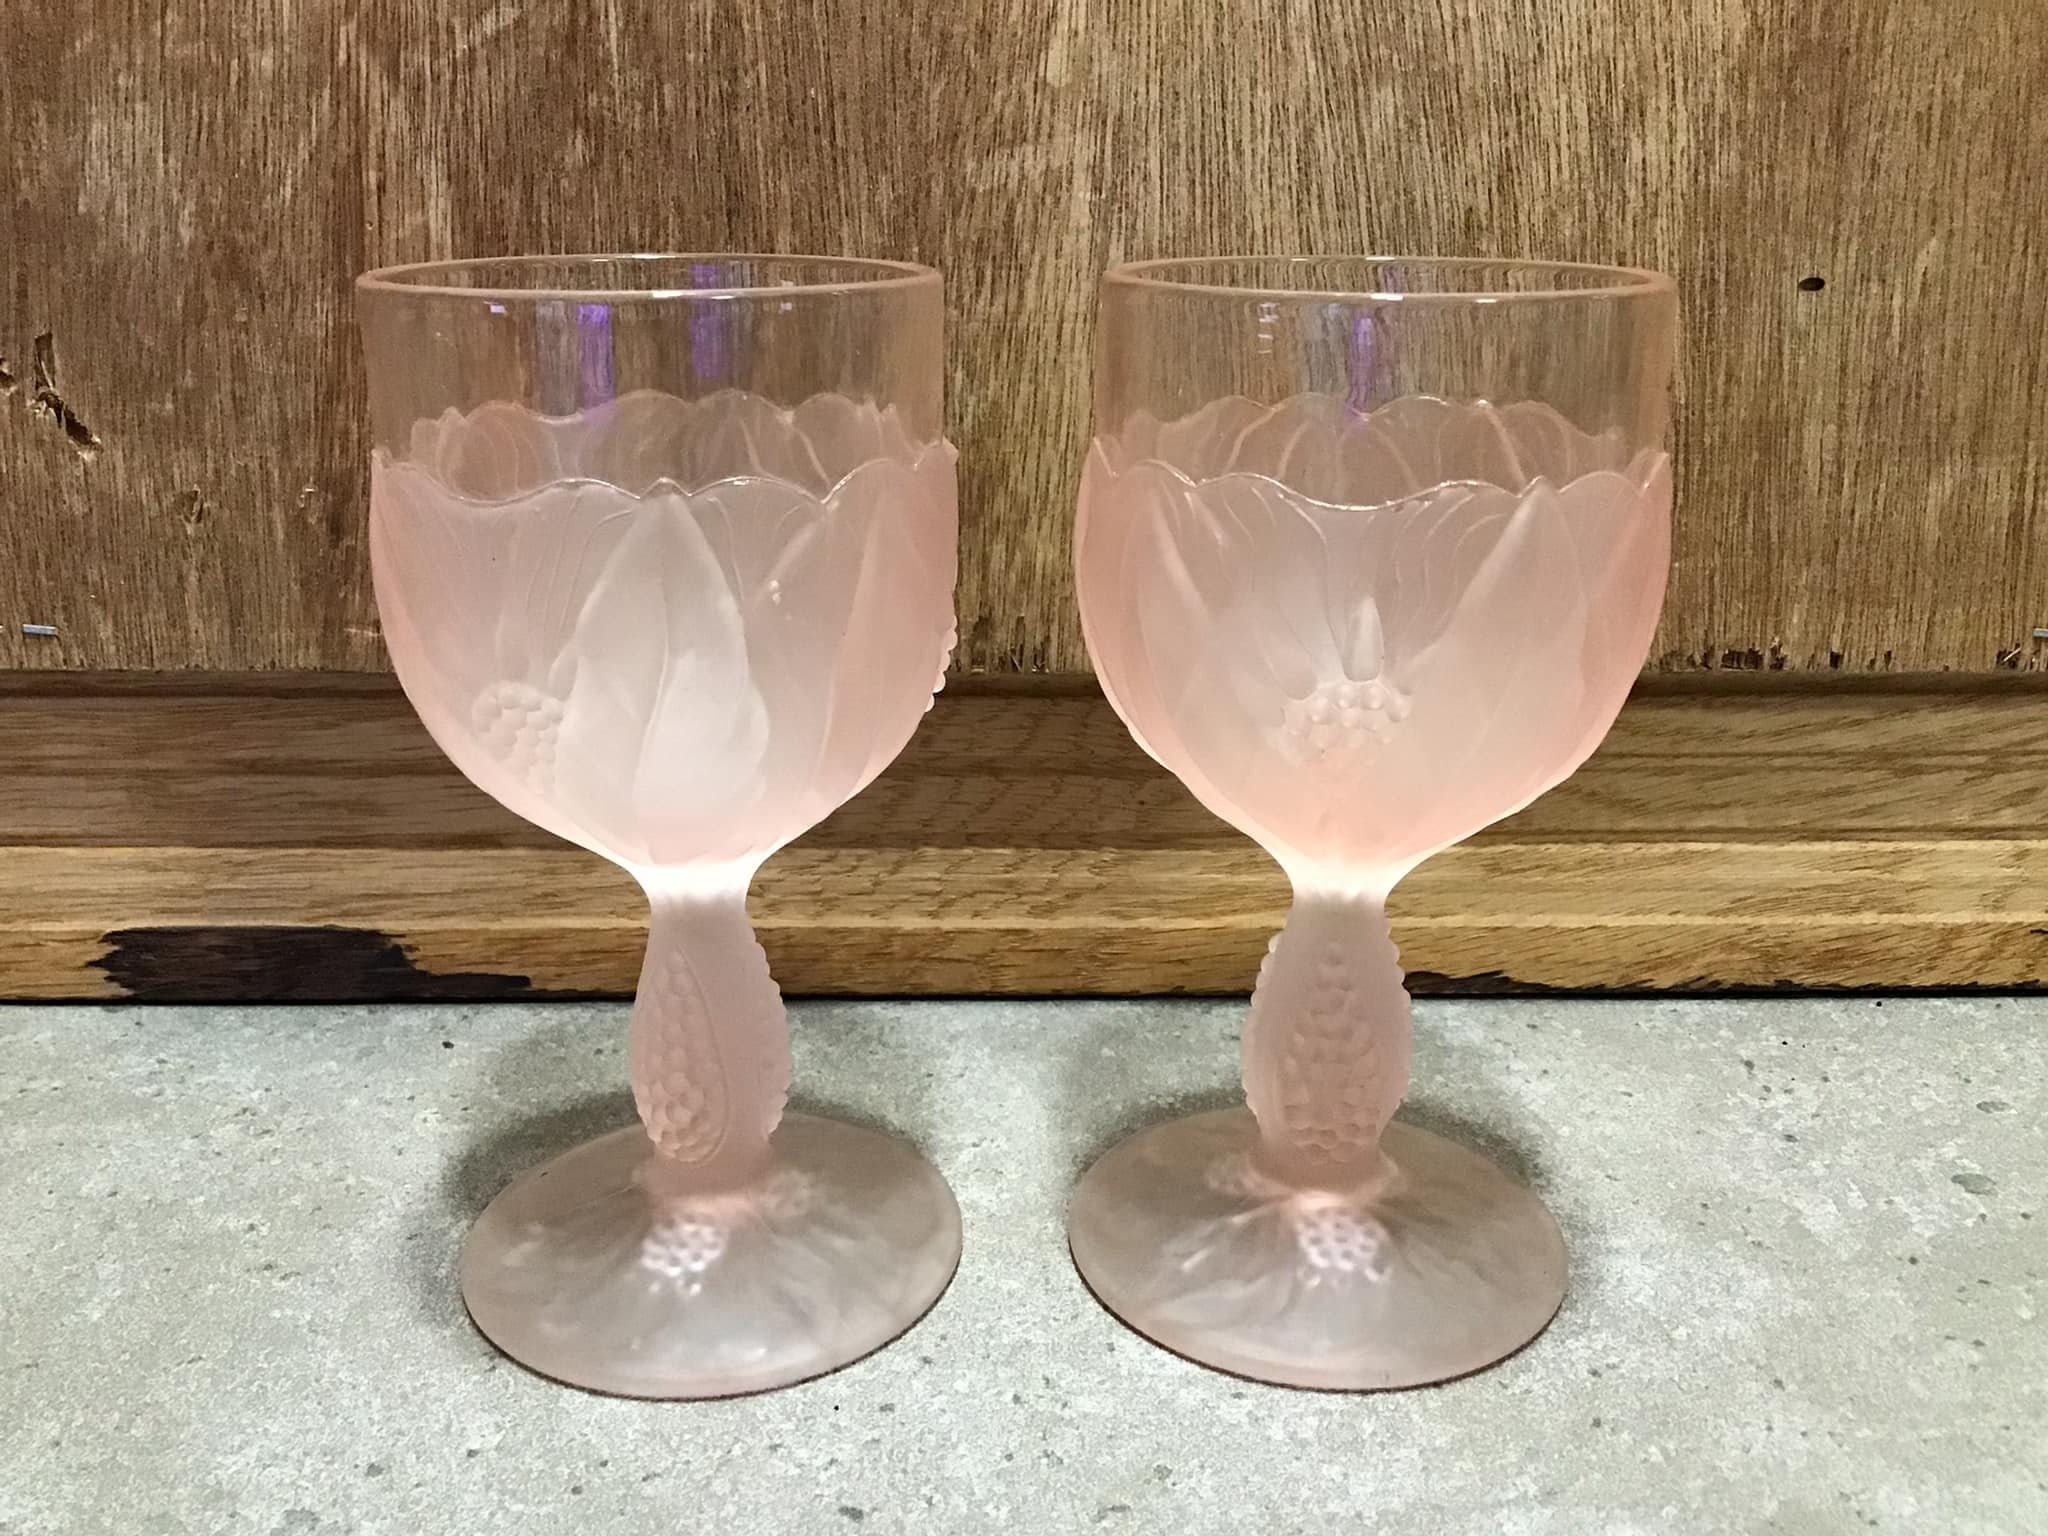 Frosted Colored Wine Glasses - Vibrant Wine Glass Collection